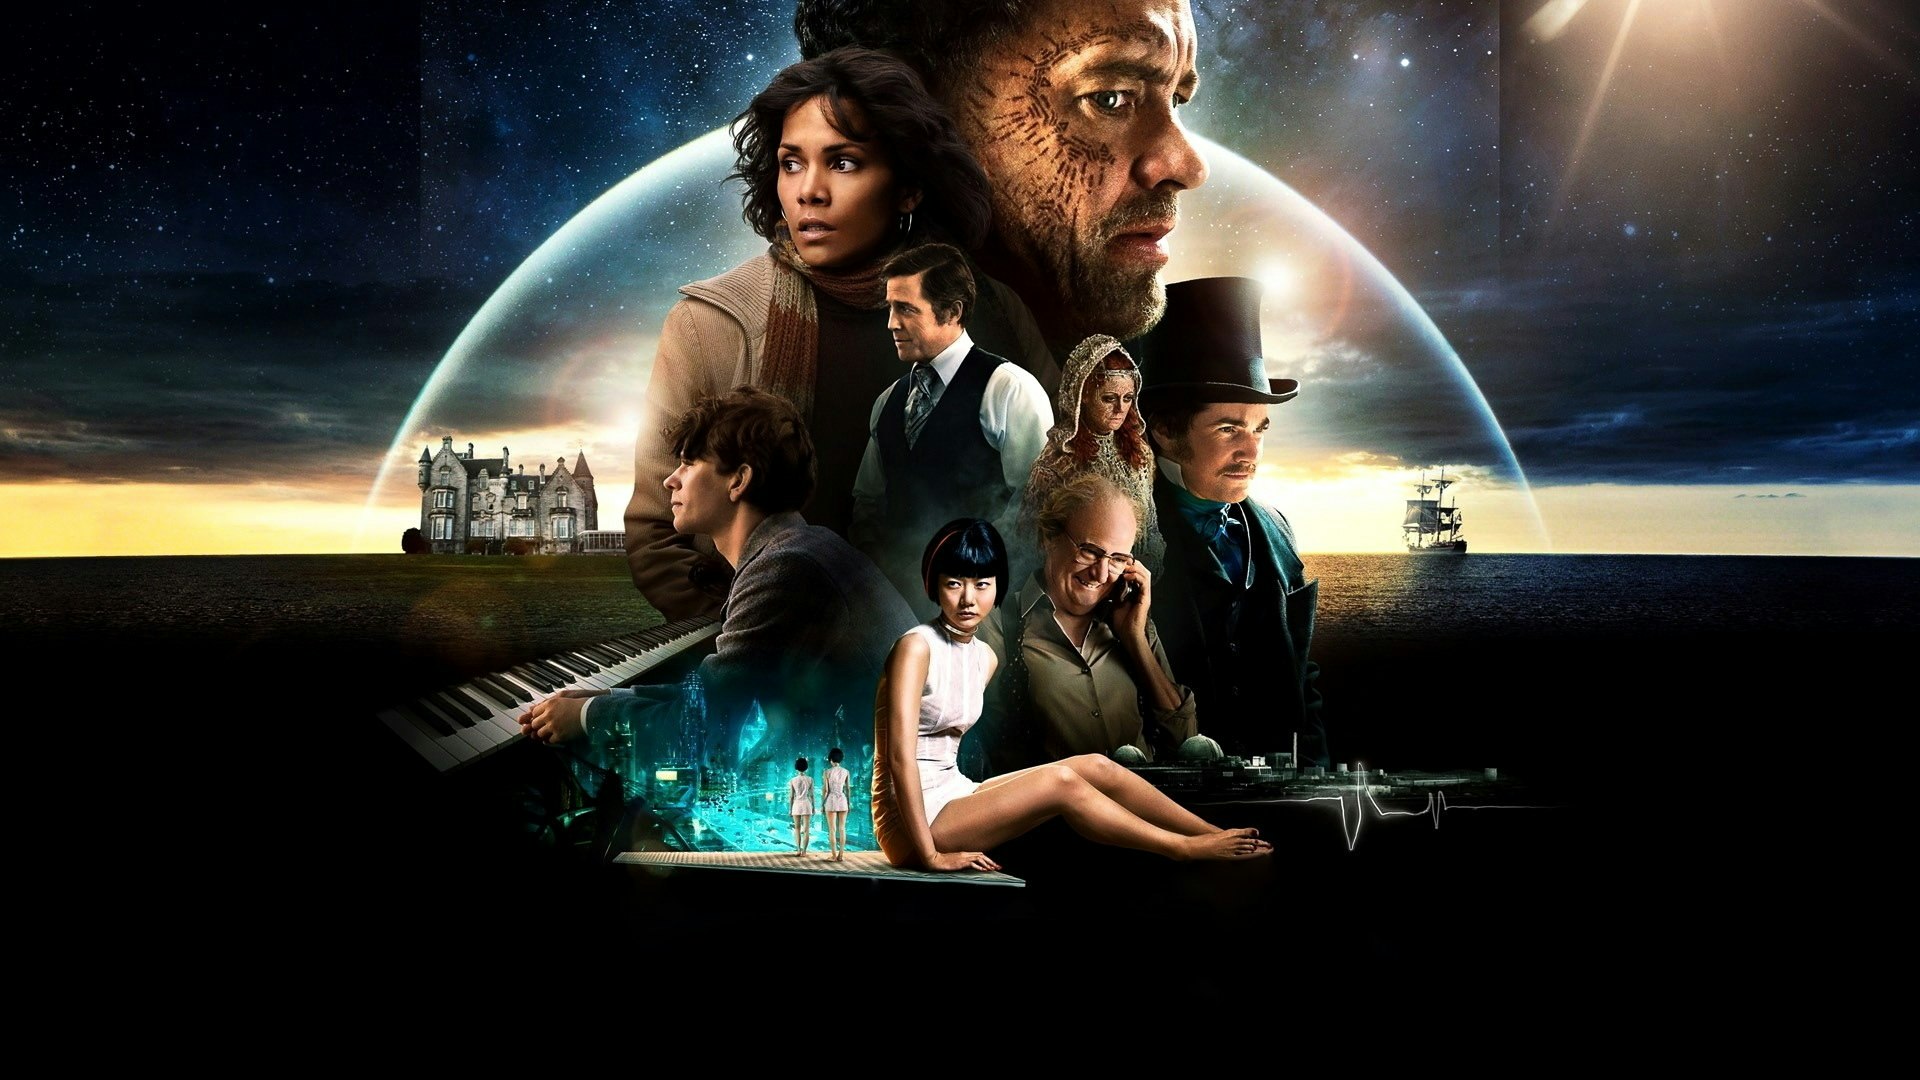 Cloud Atlas, Explained: A Guide to Characters & Connections